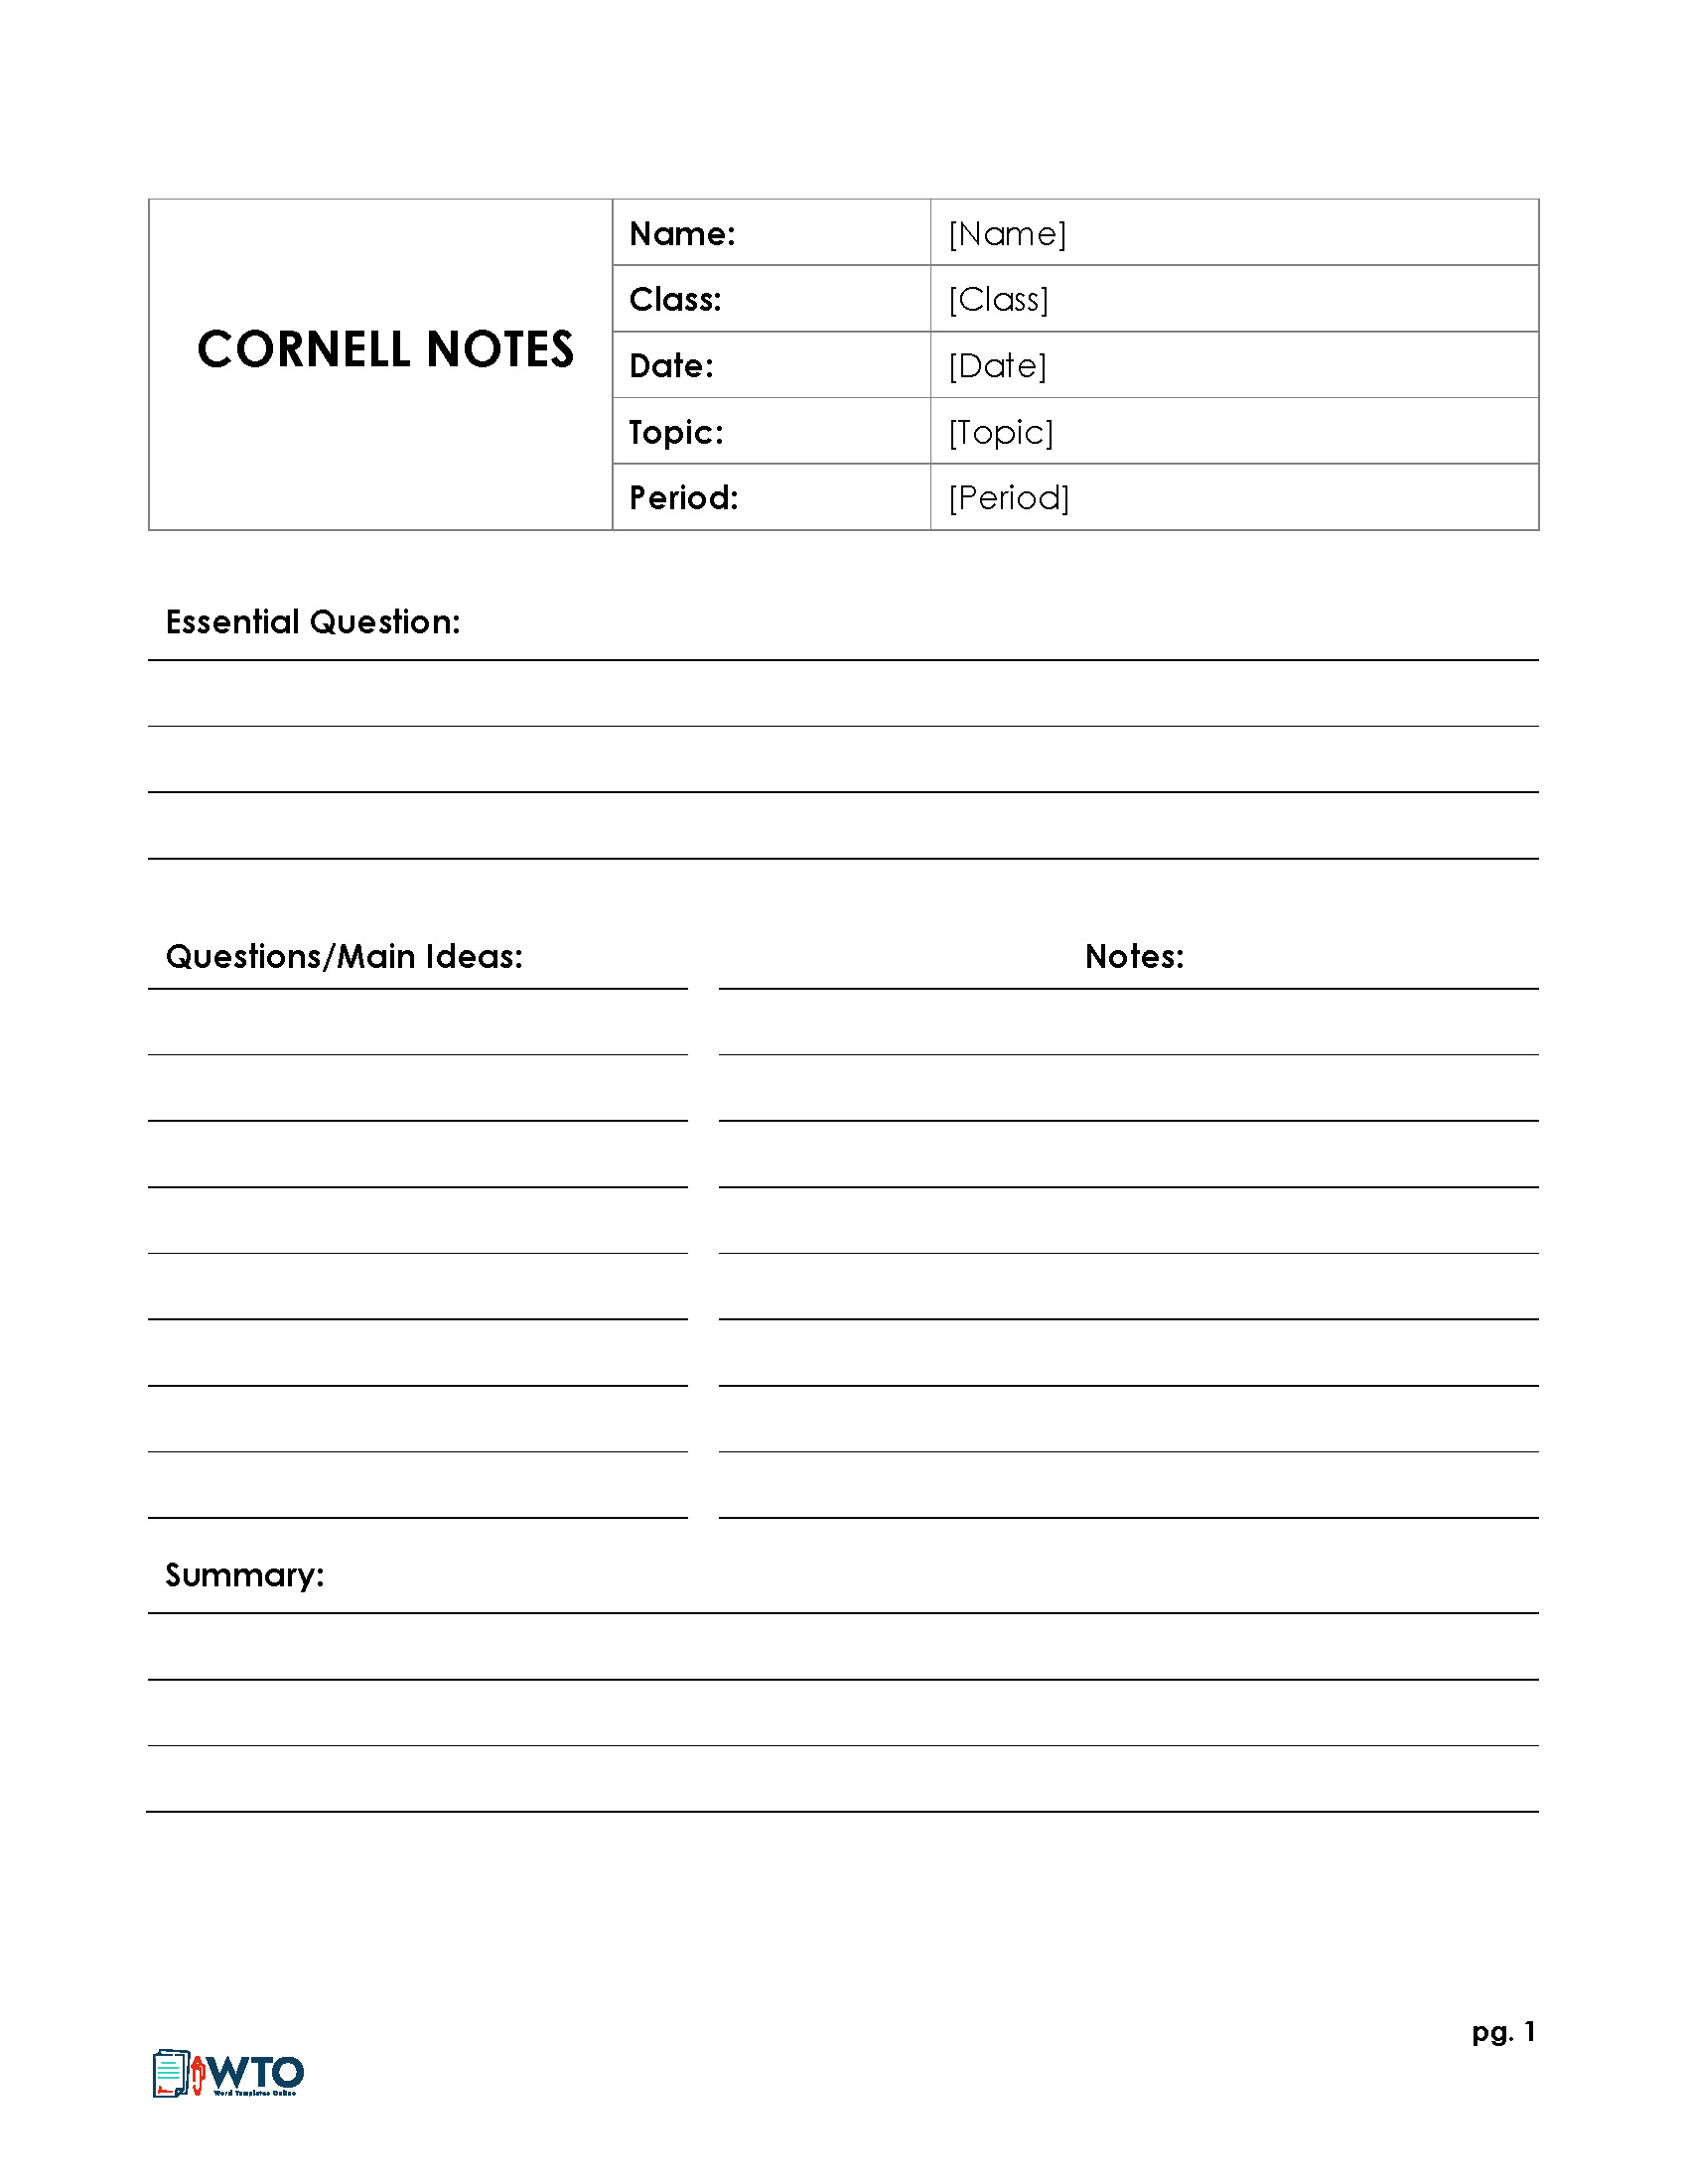 21 Free Cornell Note Templates (Cornell Note Taking Explained) For Note Taking Template Pdf